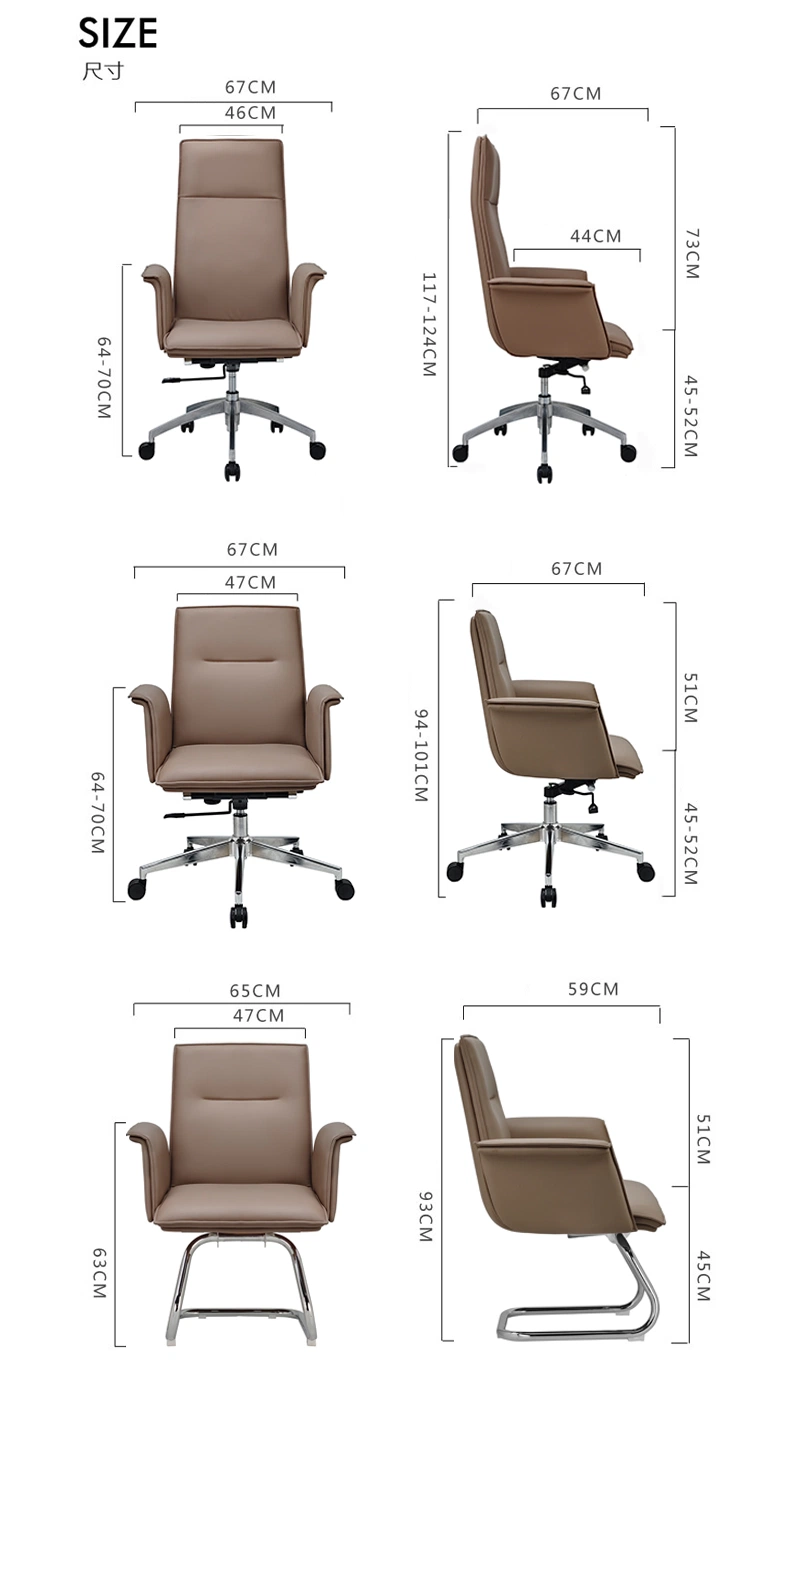 China Manufacturer Ergonomic Comfortable Office Reclining Desk Leather PU Manager Gaming Chair